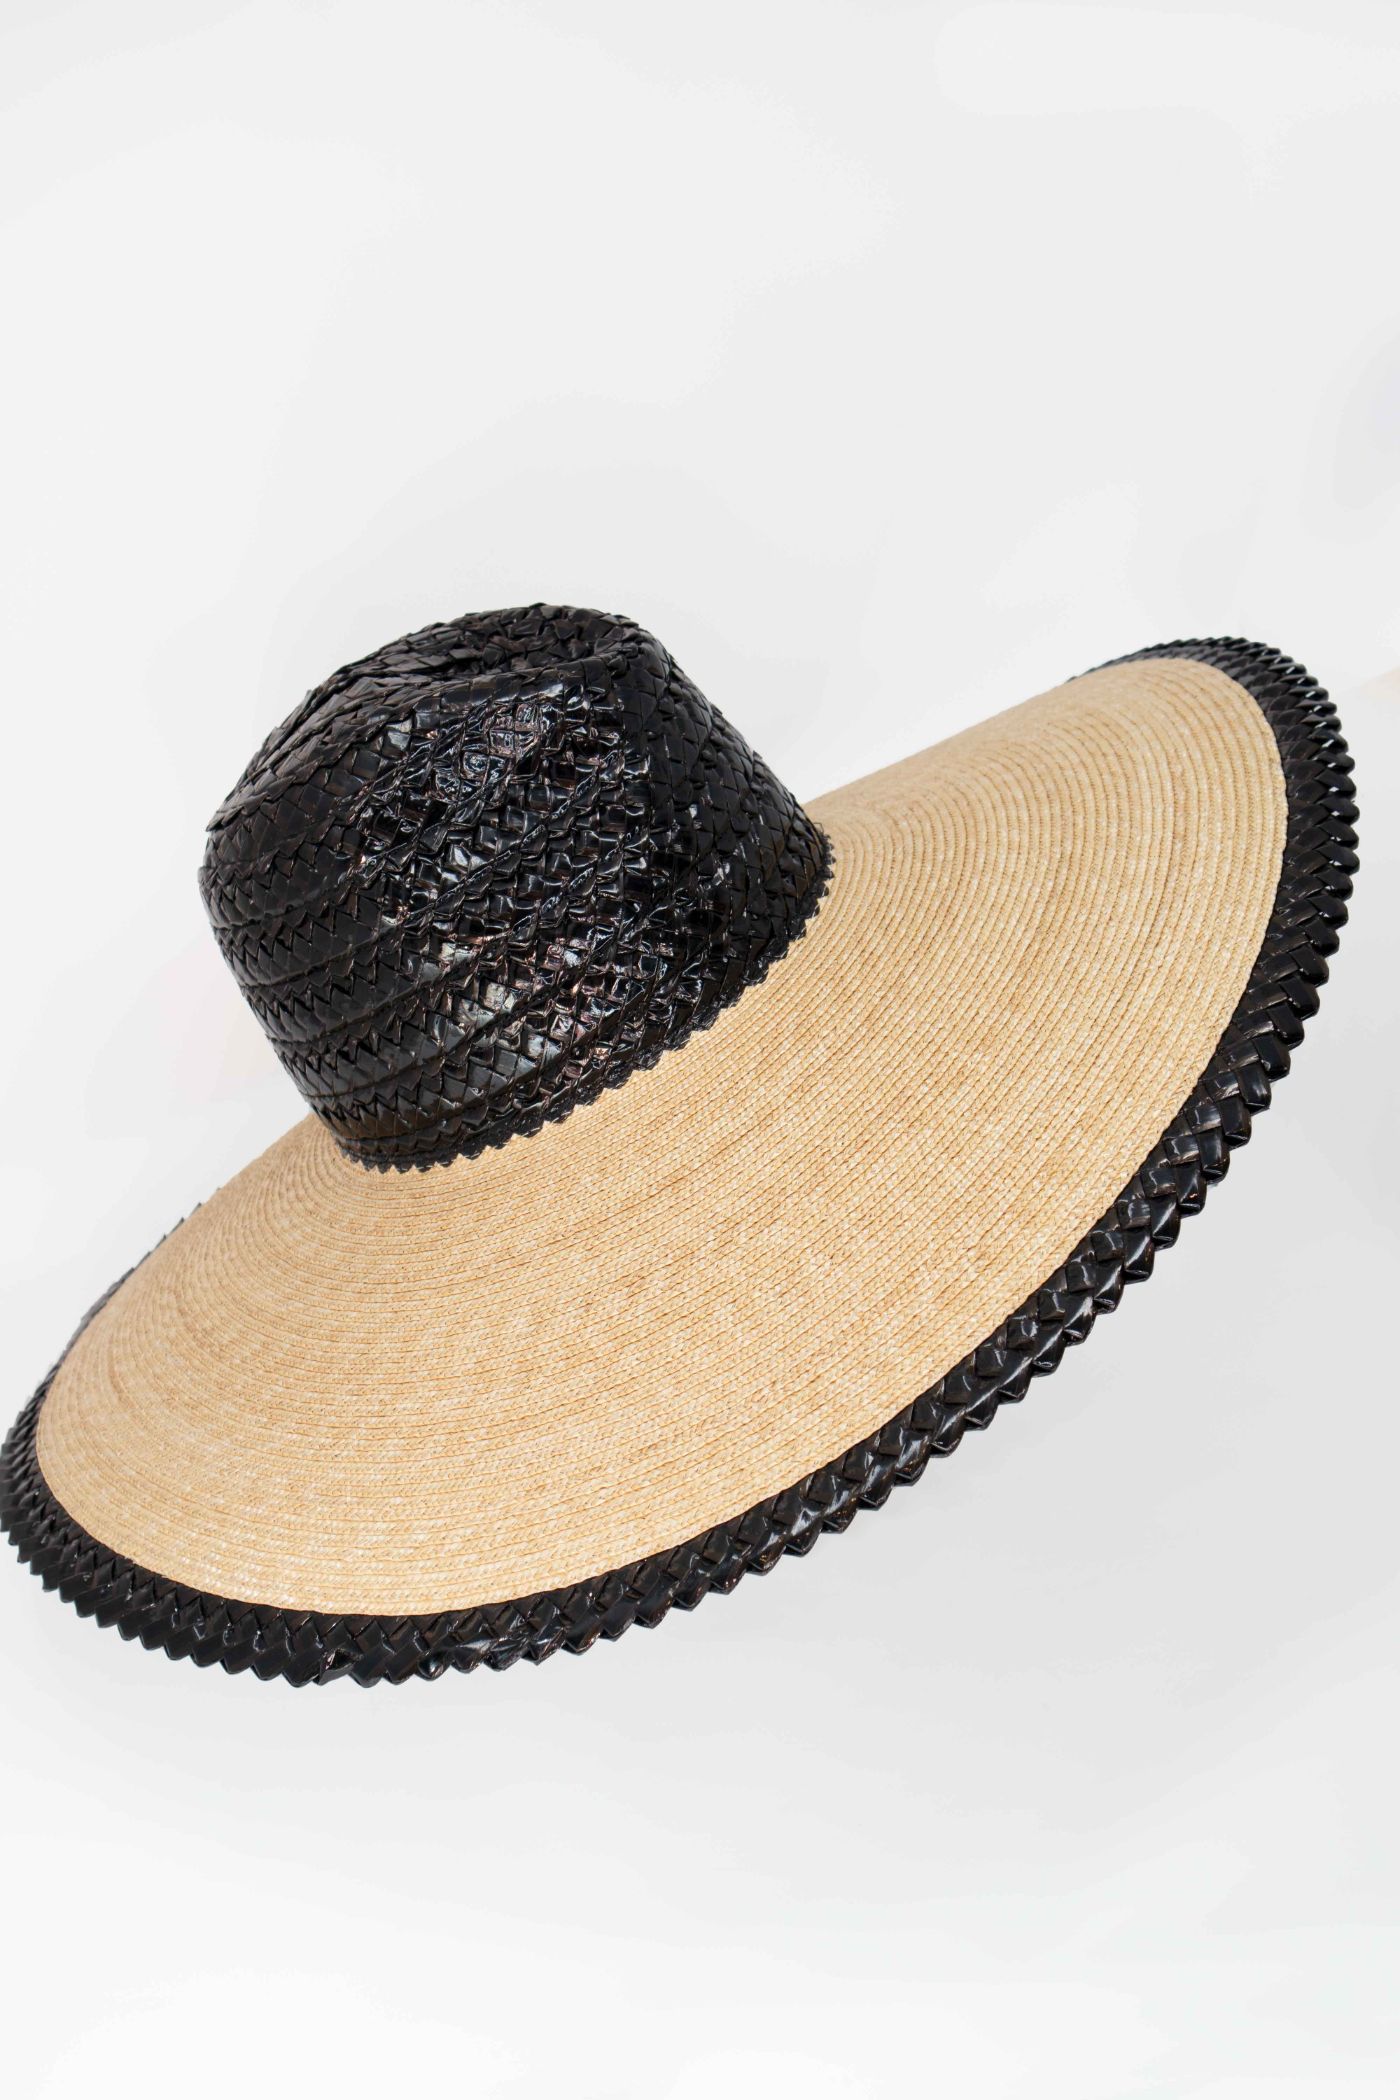 Marilyn’s Italian Wide Brimmed straw hat with edged rascello